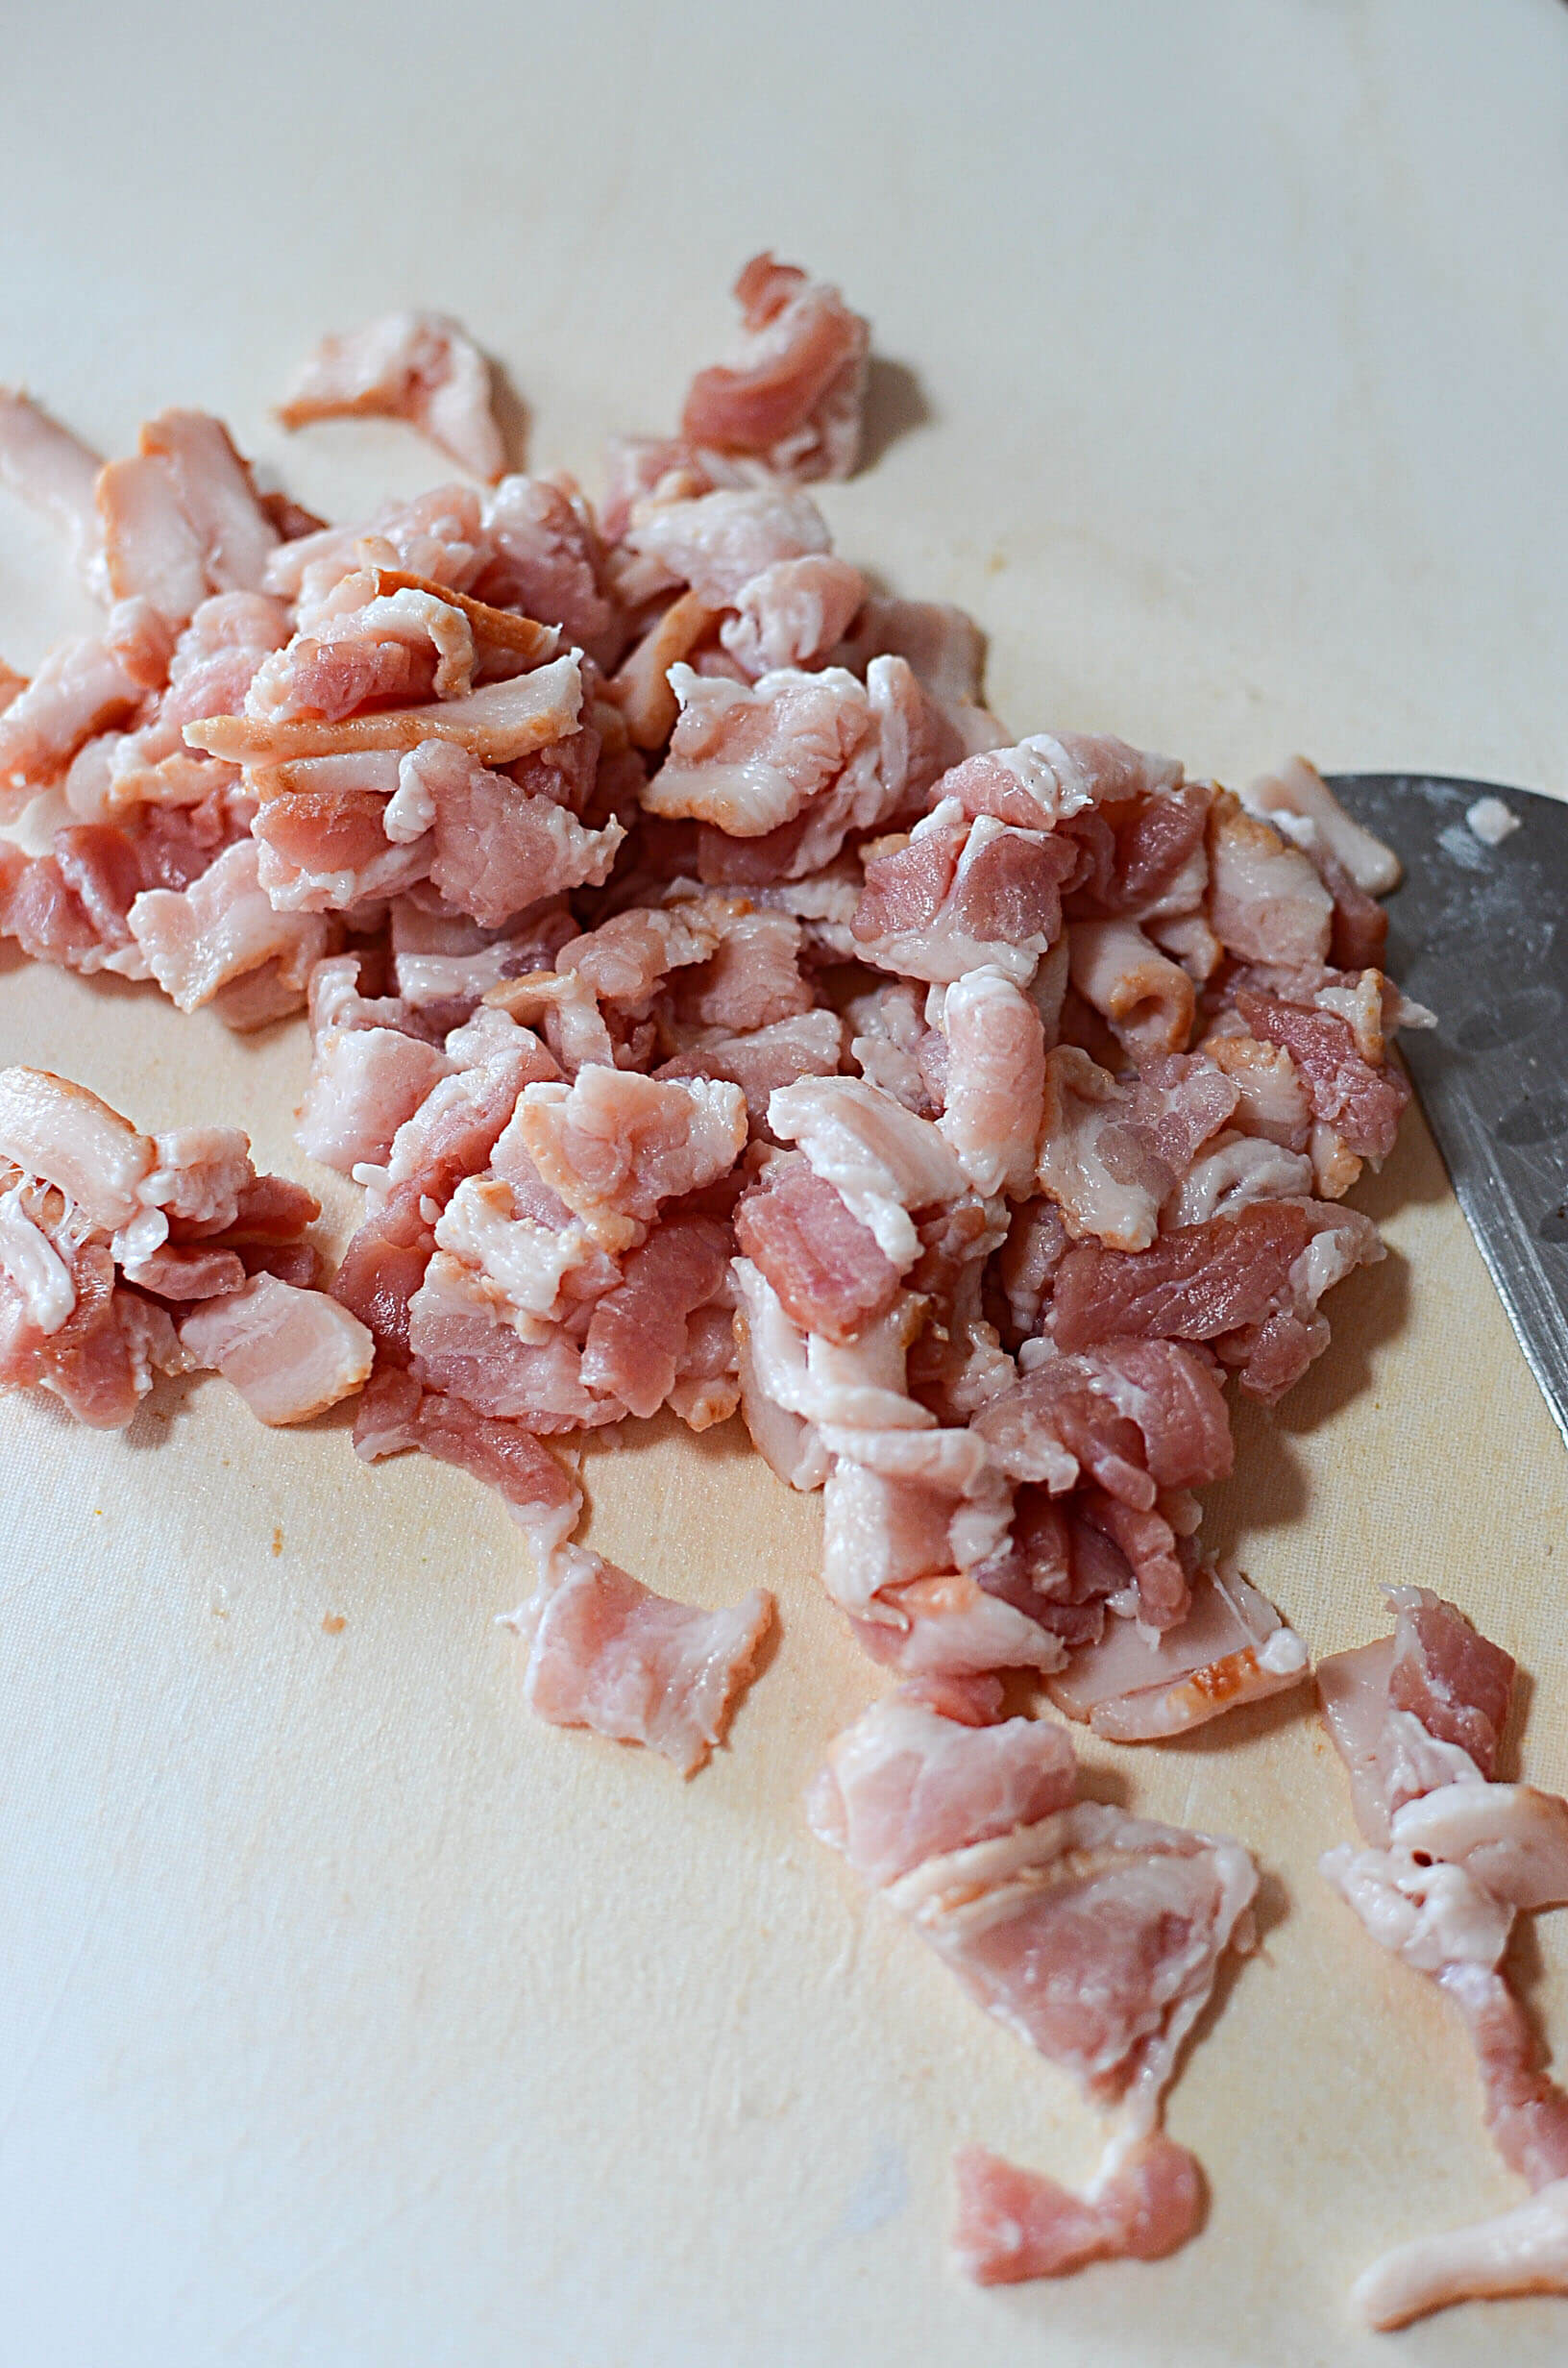 Diced bacon on a white cutting board with a knife on the right.